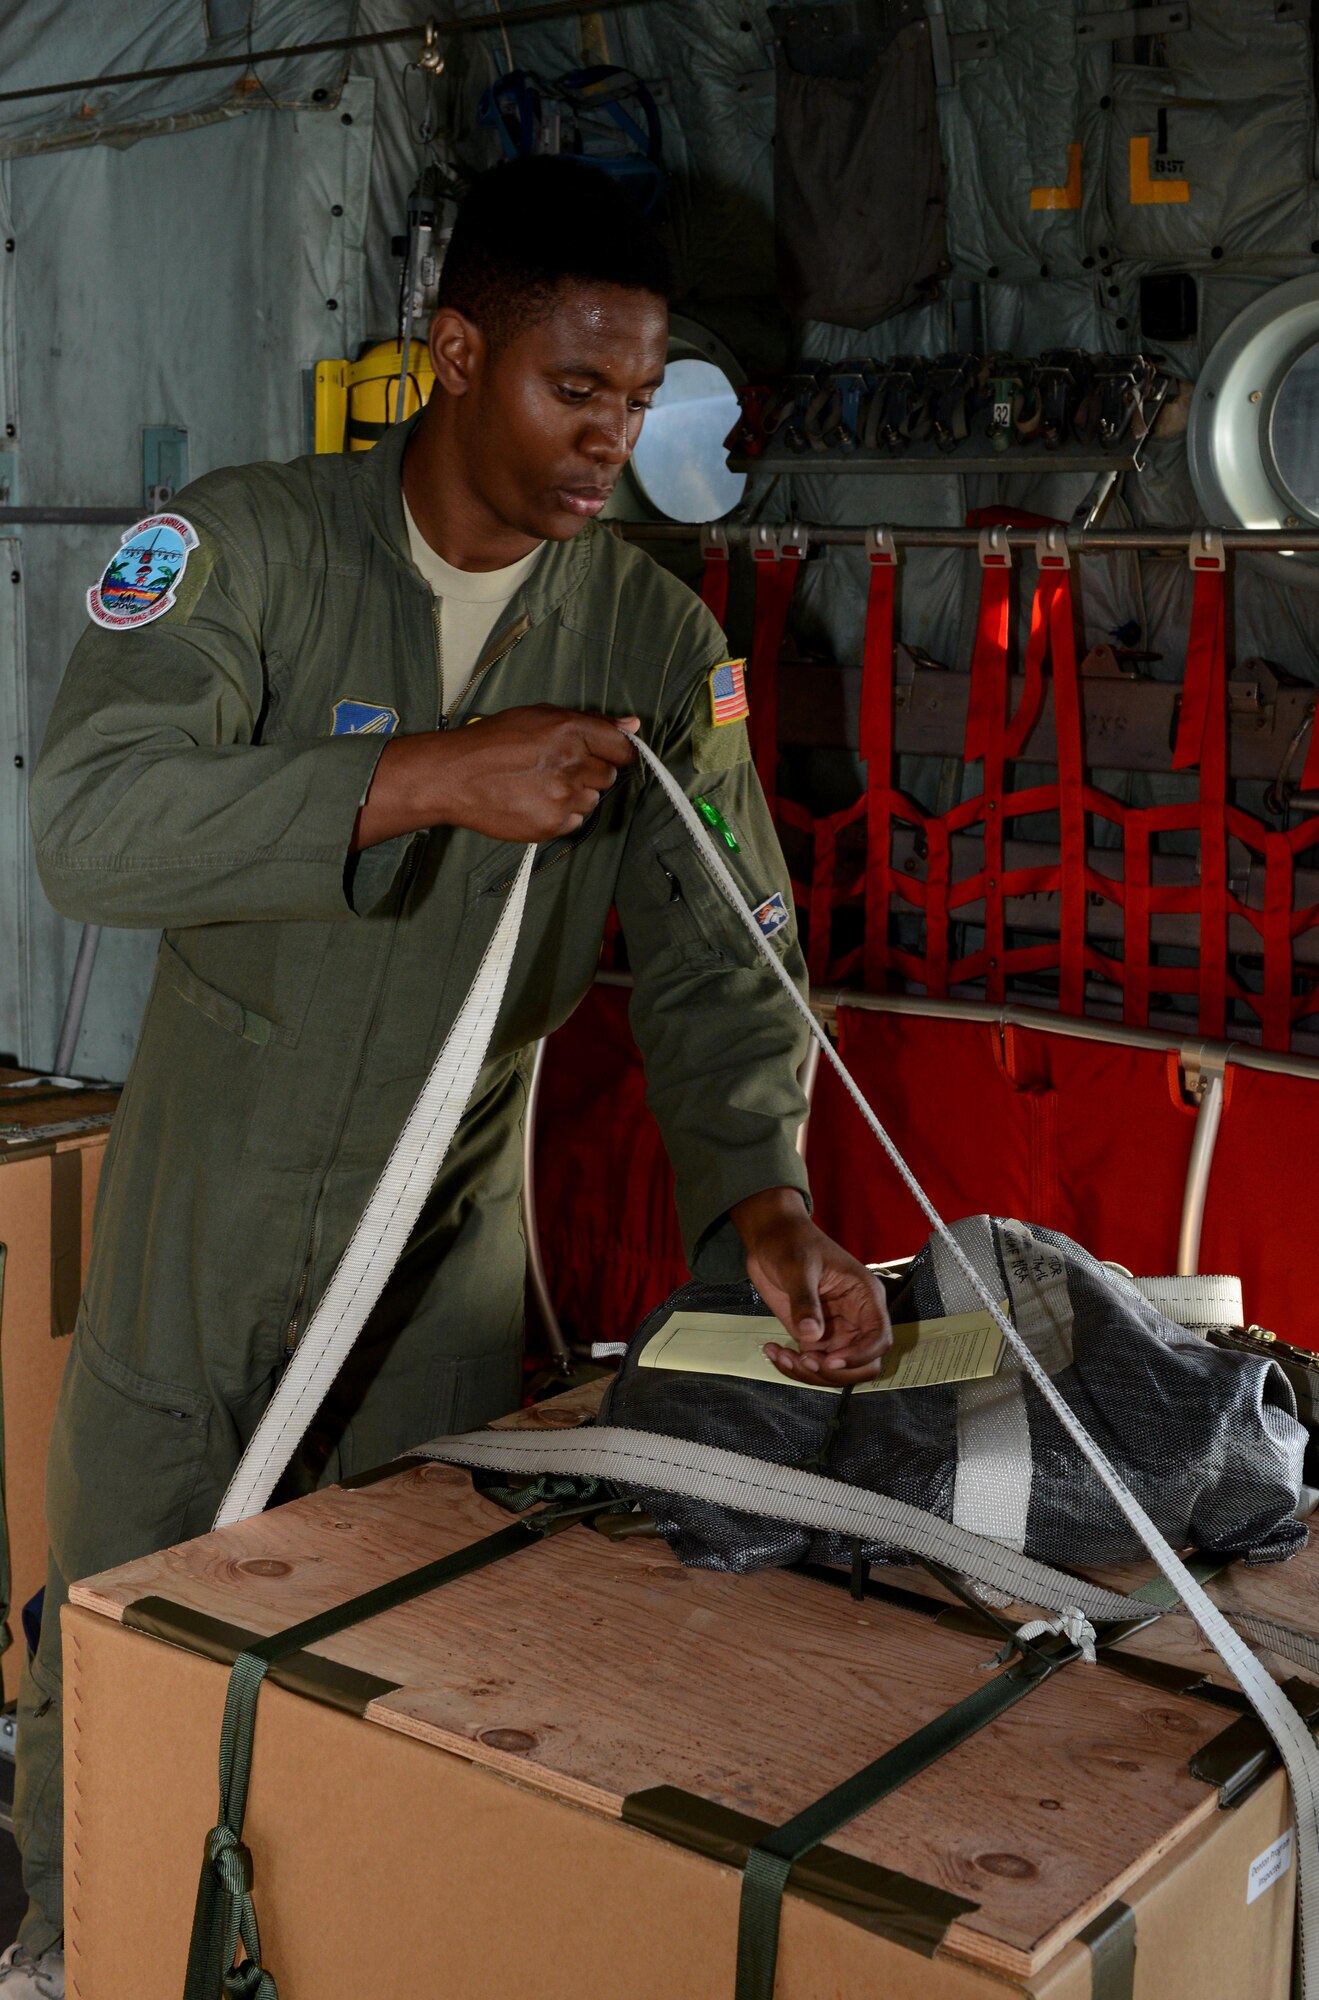 Senior Airman Deondre Rogers, a loadmaster from the 36th Airlift Squadron, Yokota Air Base, Japan, ties down bundles Dec. 7, 2016, at Andersen Air Force Base, Guam for Operation Christmas Drop. This operation has been in existence for   65 years. Operation Christmas brings food, clothes, toys and supplies to islanders throughout the Pacific via C130 Hercules airdrops. (U.S. Air Force photo by Senior Airman Arielle K. Vasquez/Released)